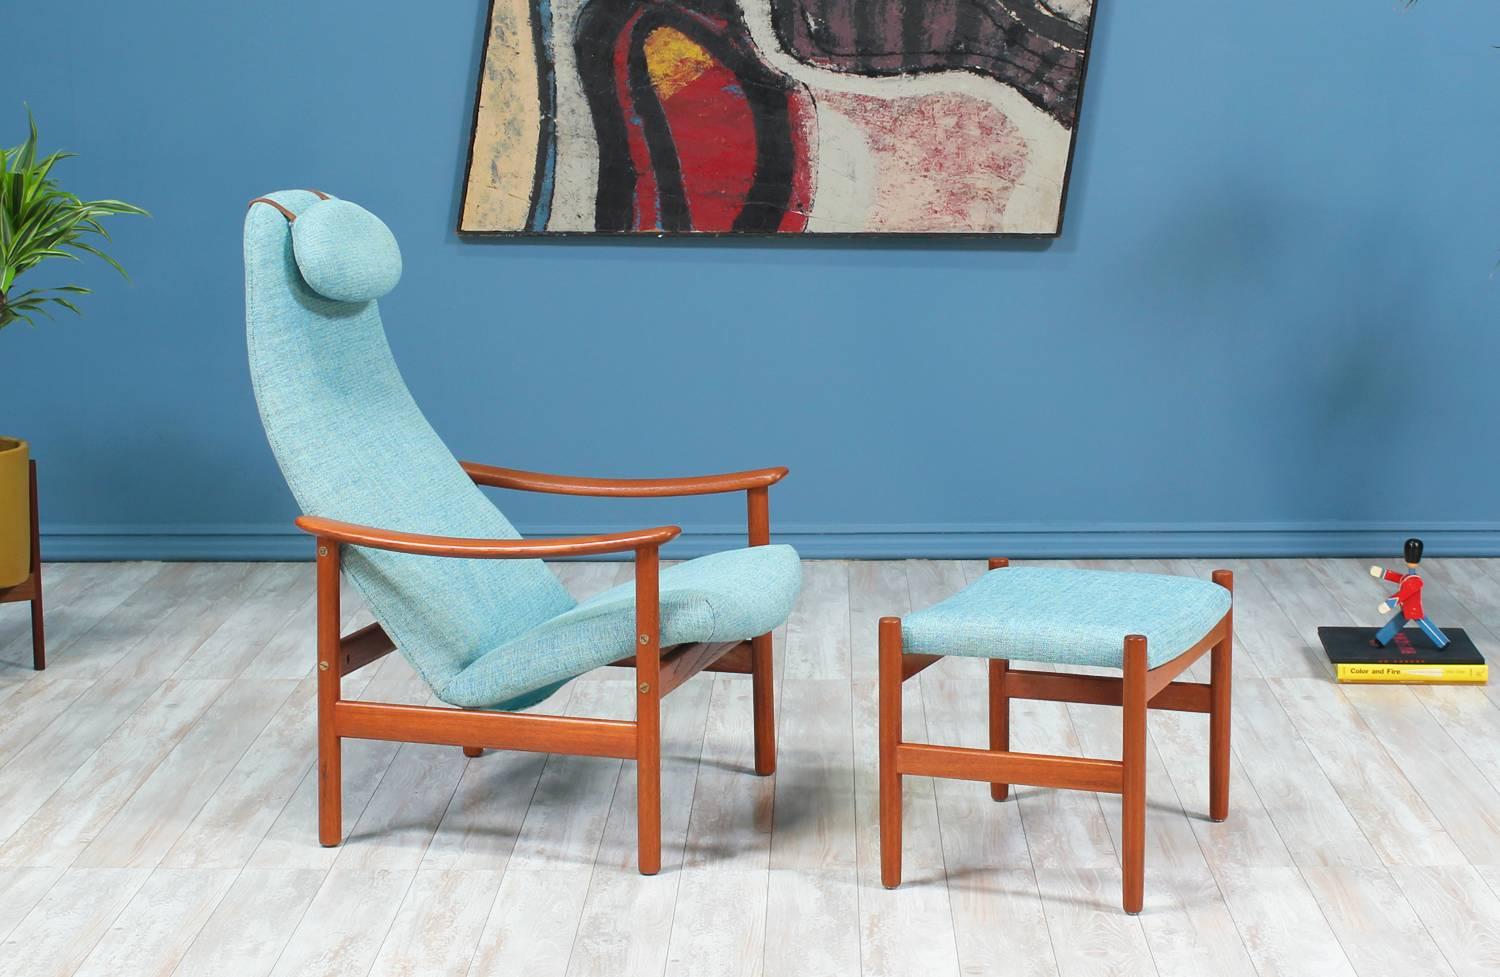 Lounge Chair with Ottoman designed by Alf Svensson for Ljungs Industrier in Sweden circa 1960’s. Newly reupholstered in a beautiful aquamarine blue tweed fabric, this chair features a teak wood frame with sculptural armrests. The back is molded to